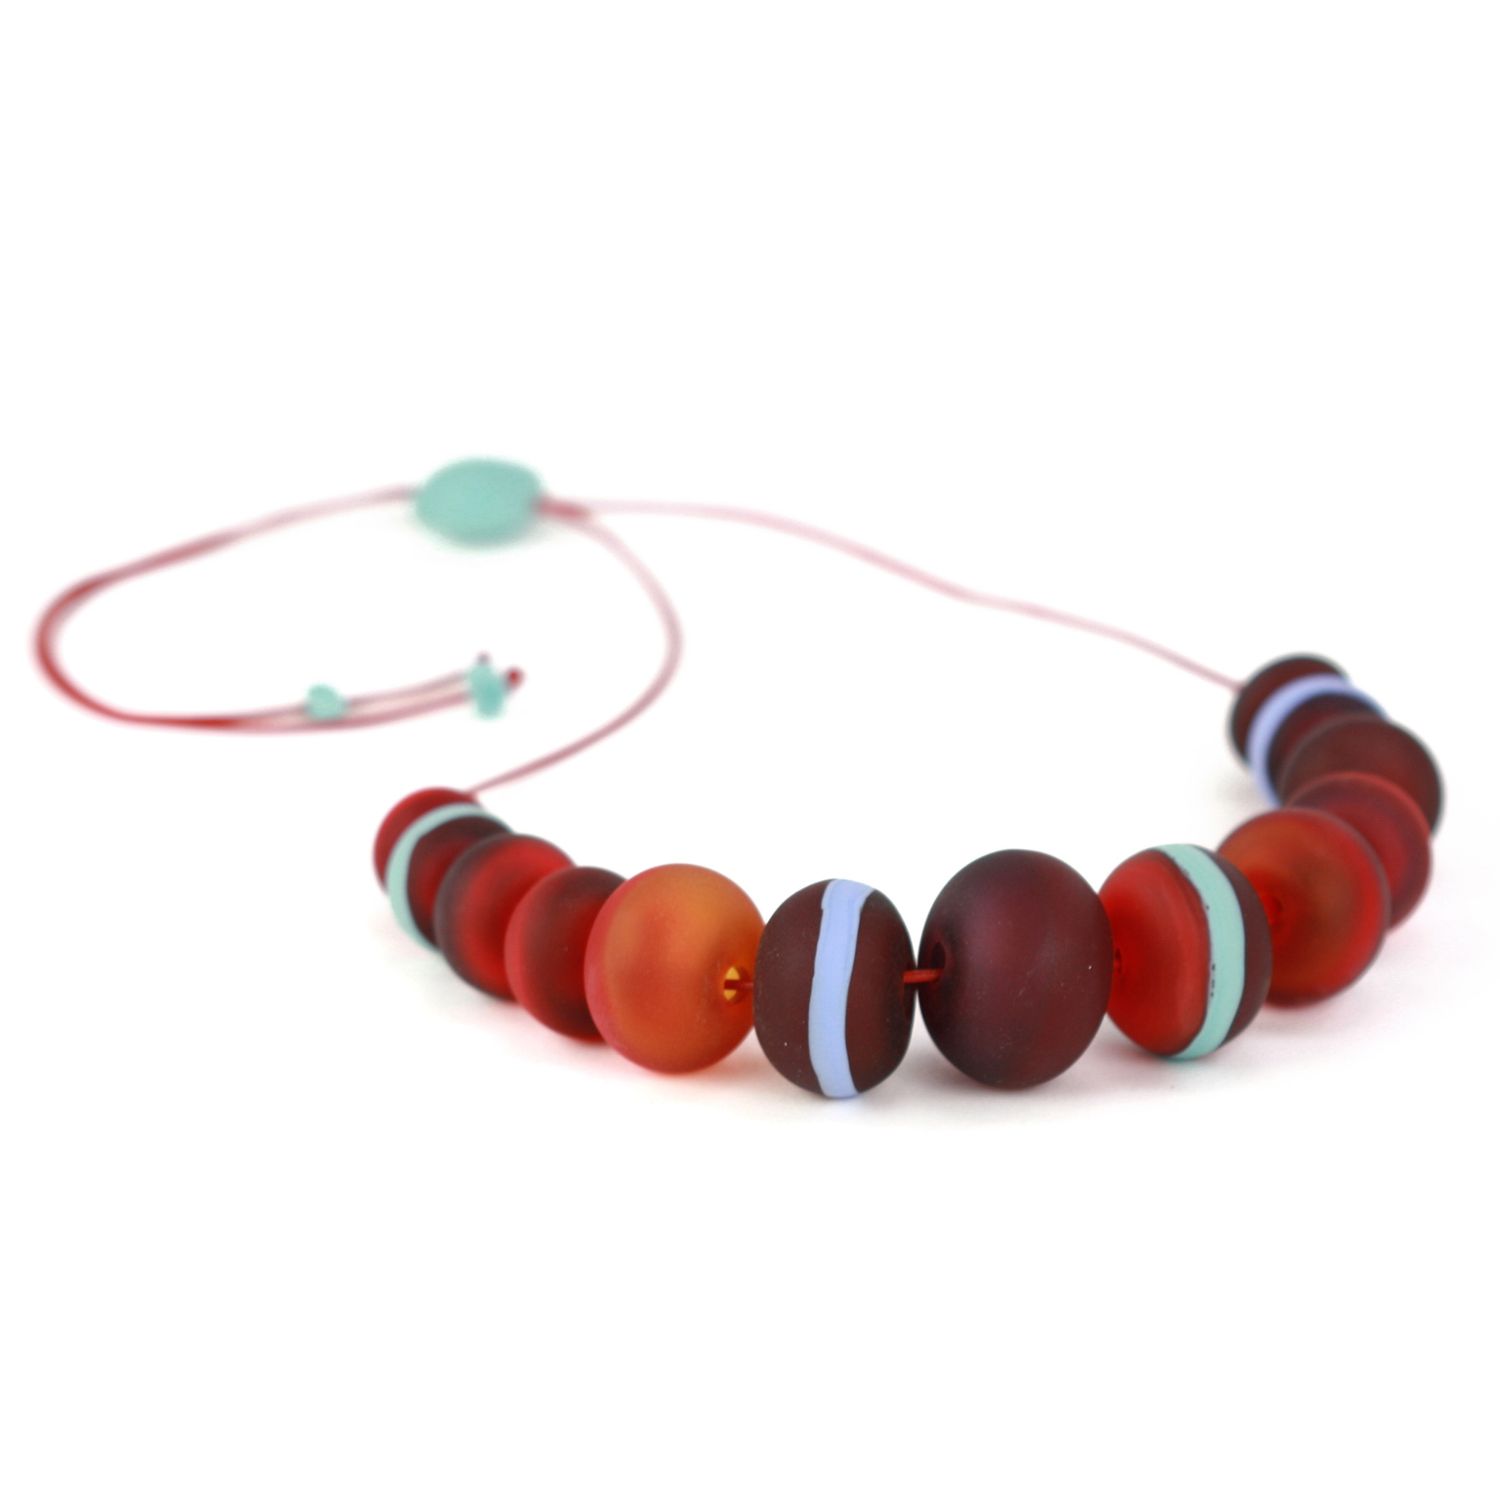 Alicia Niles: Soft Stripe Necklace – Red, Orange & Blue Product Image 1 of 4